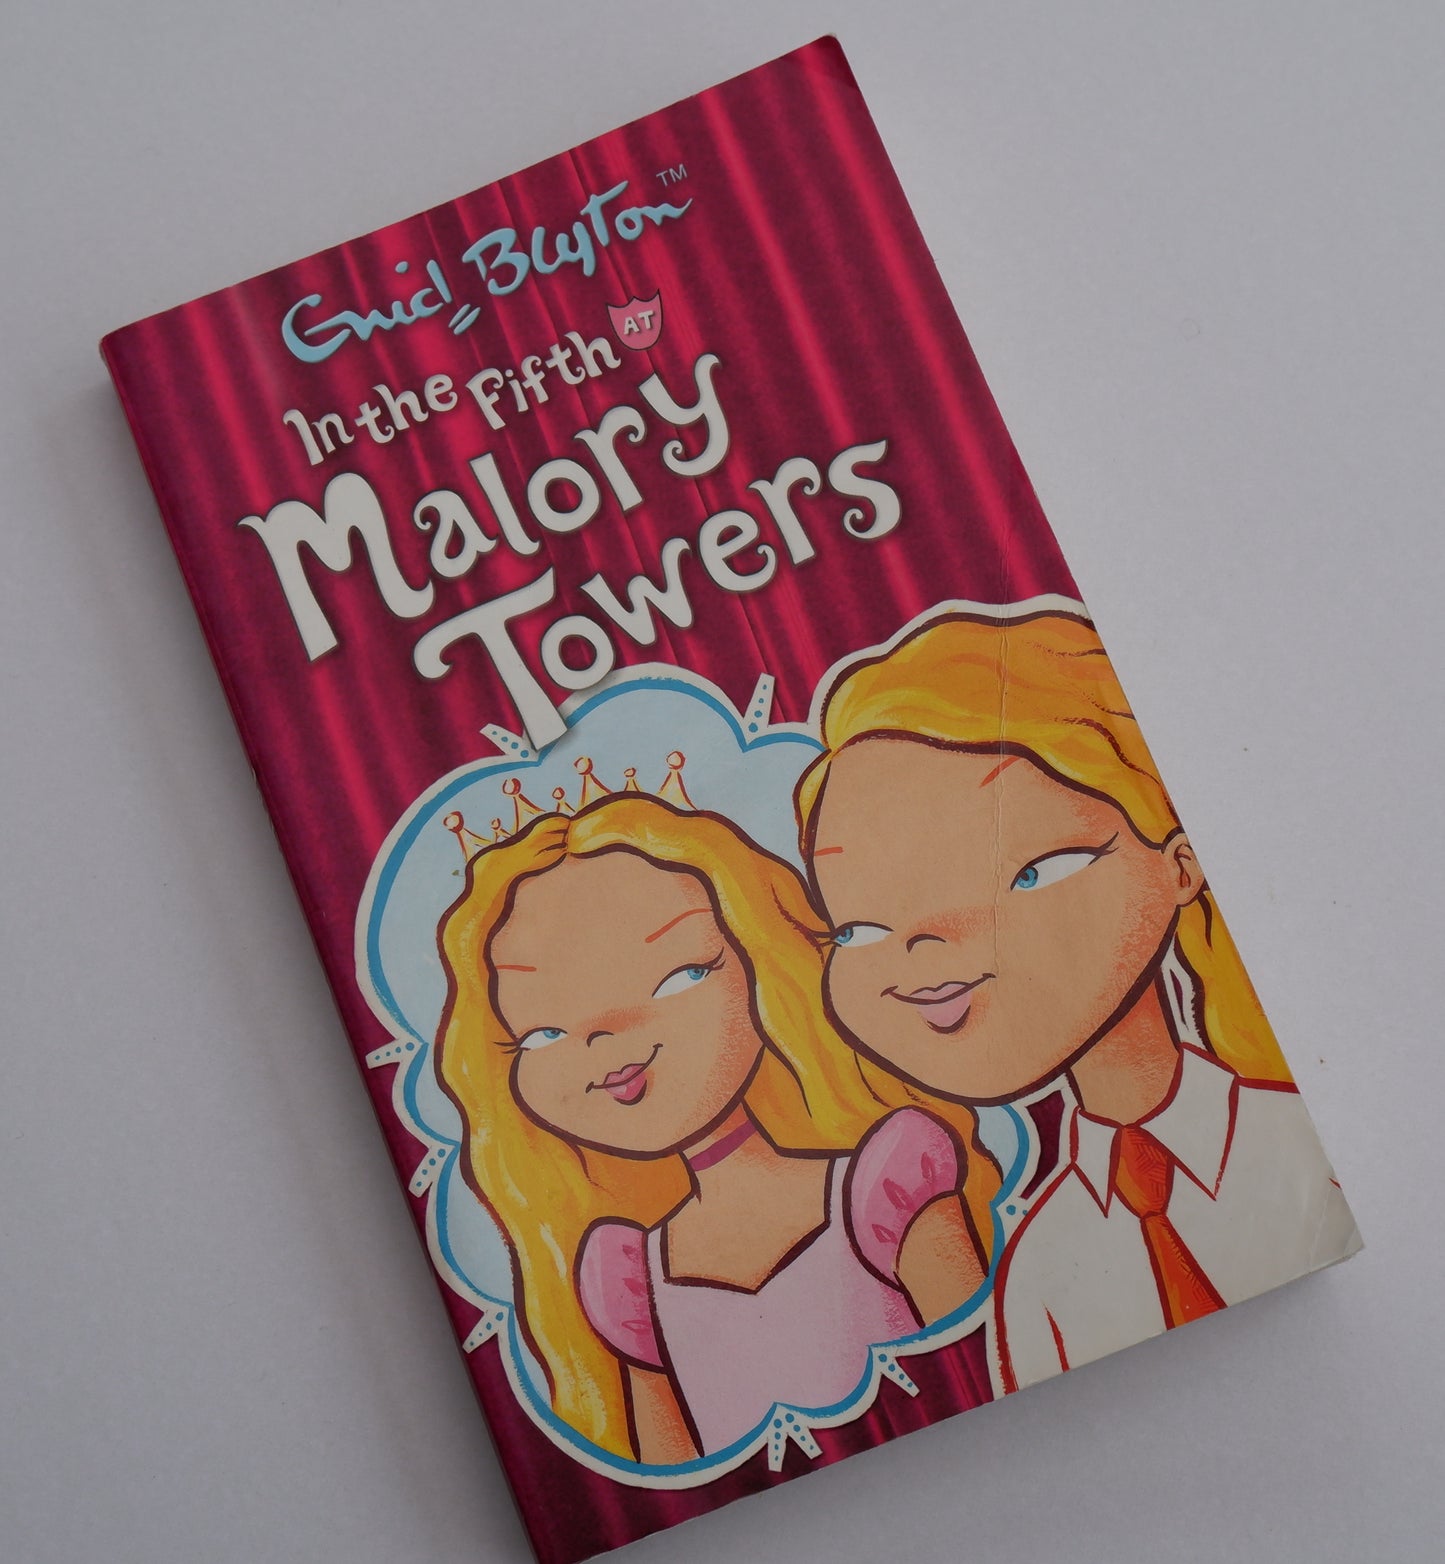 In the Fifth: Malory Towers